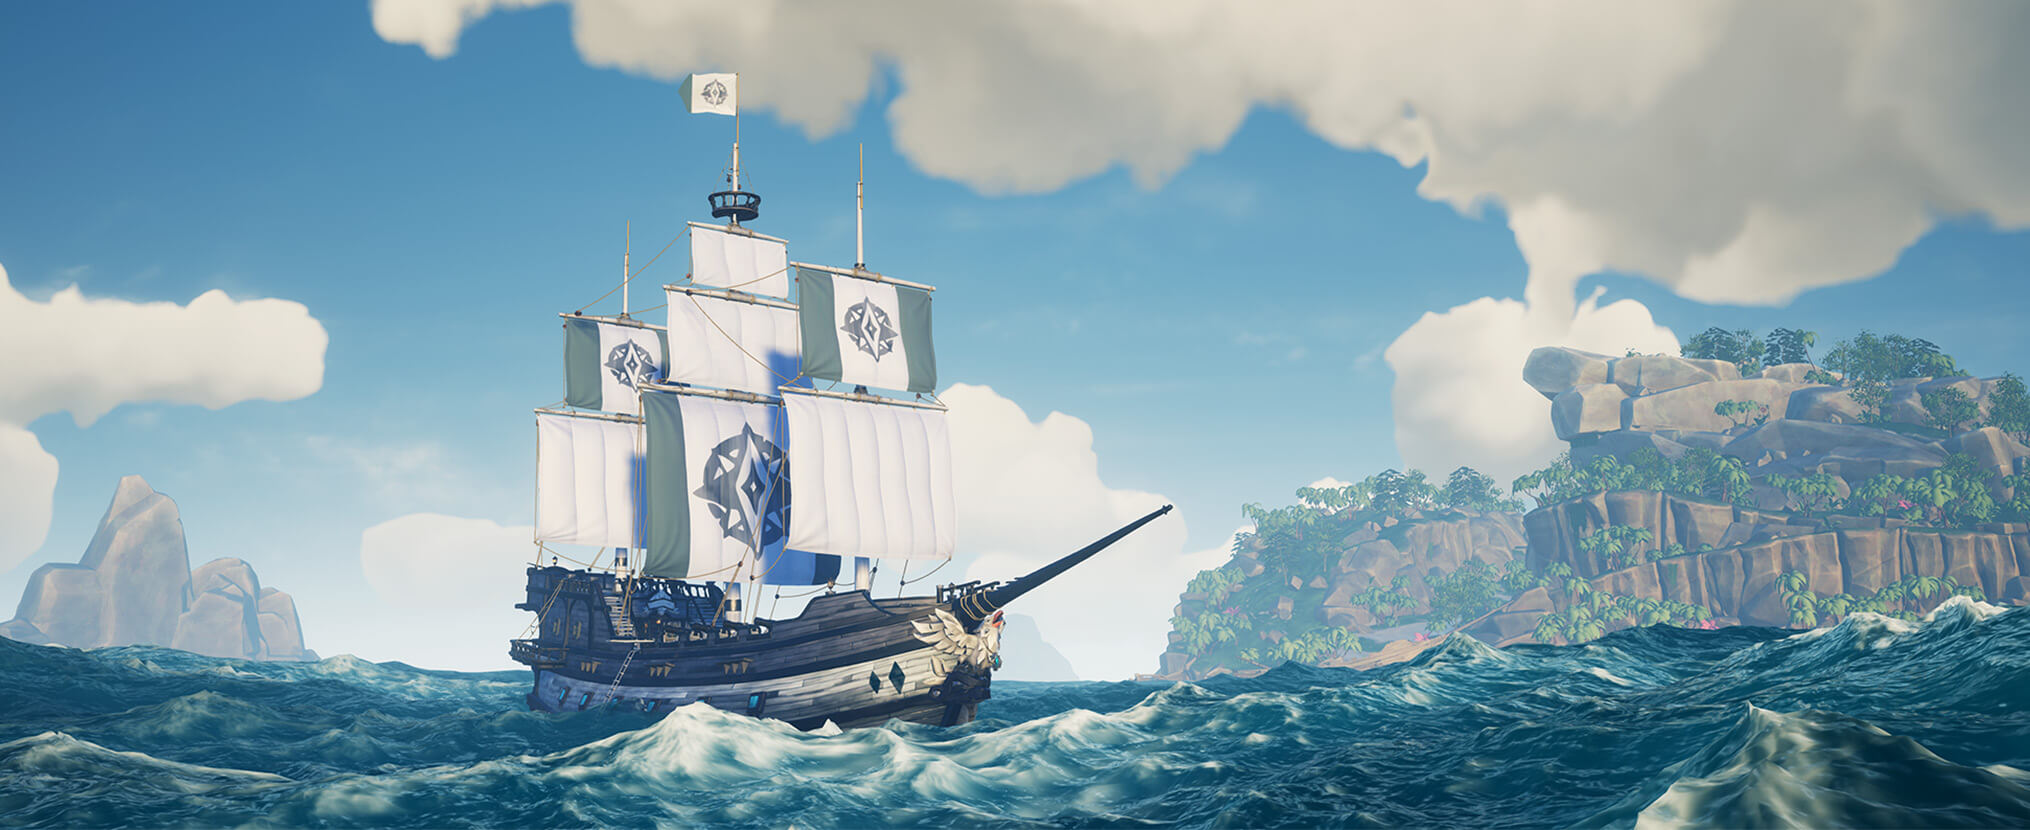 Try Out New Content And Features In The Pioneer Program Of Sea Of Thieves – Just Keep It A Secret Though